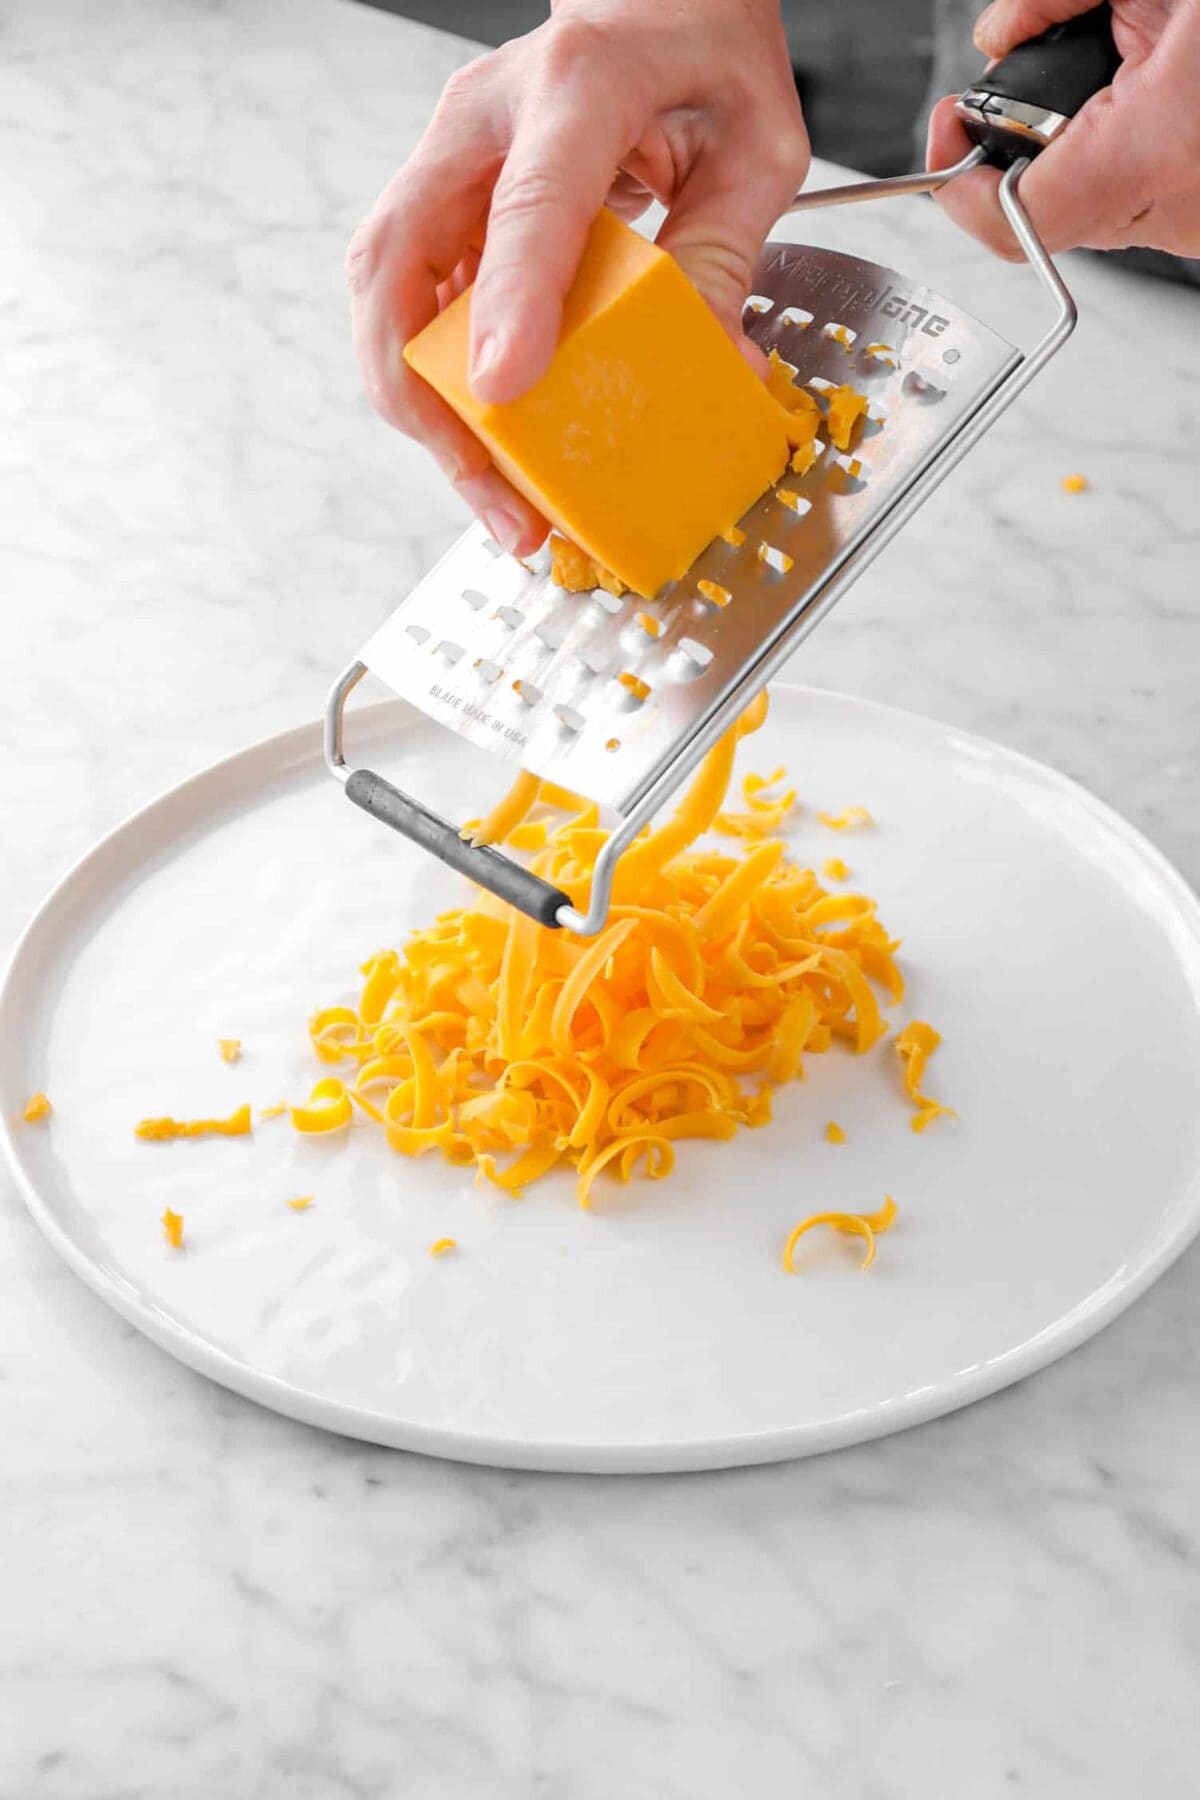 cheddar cheese being grated onto white plate